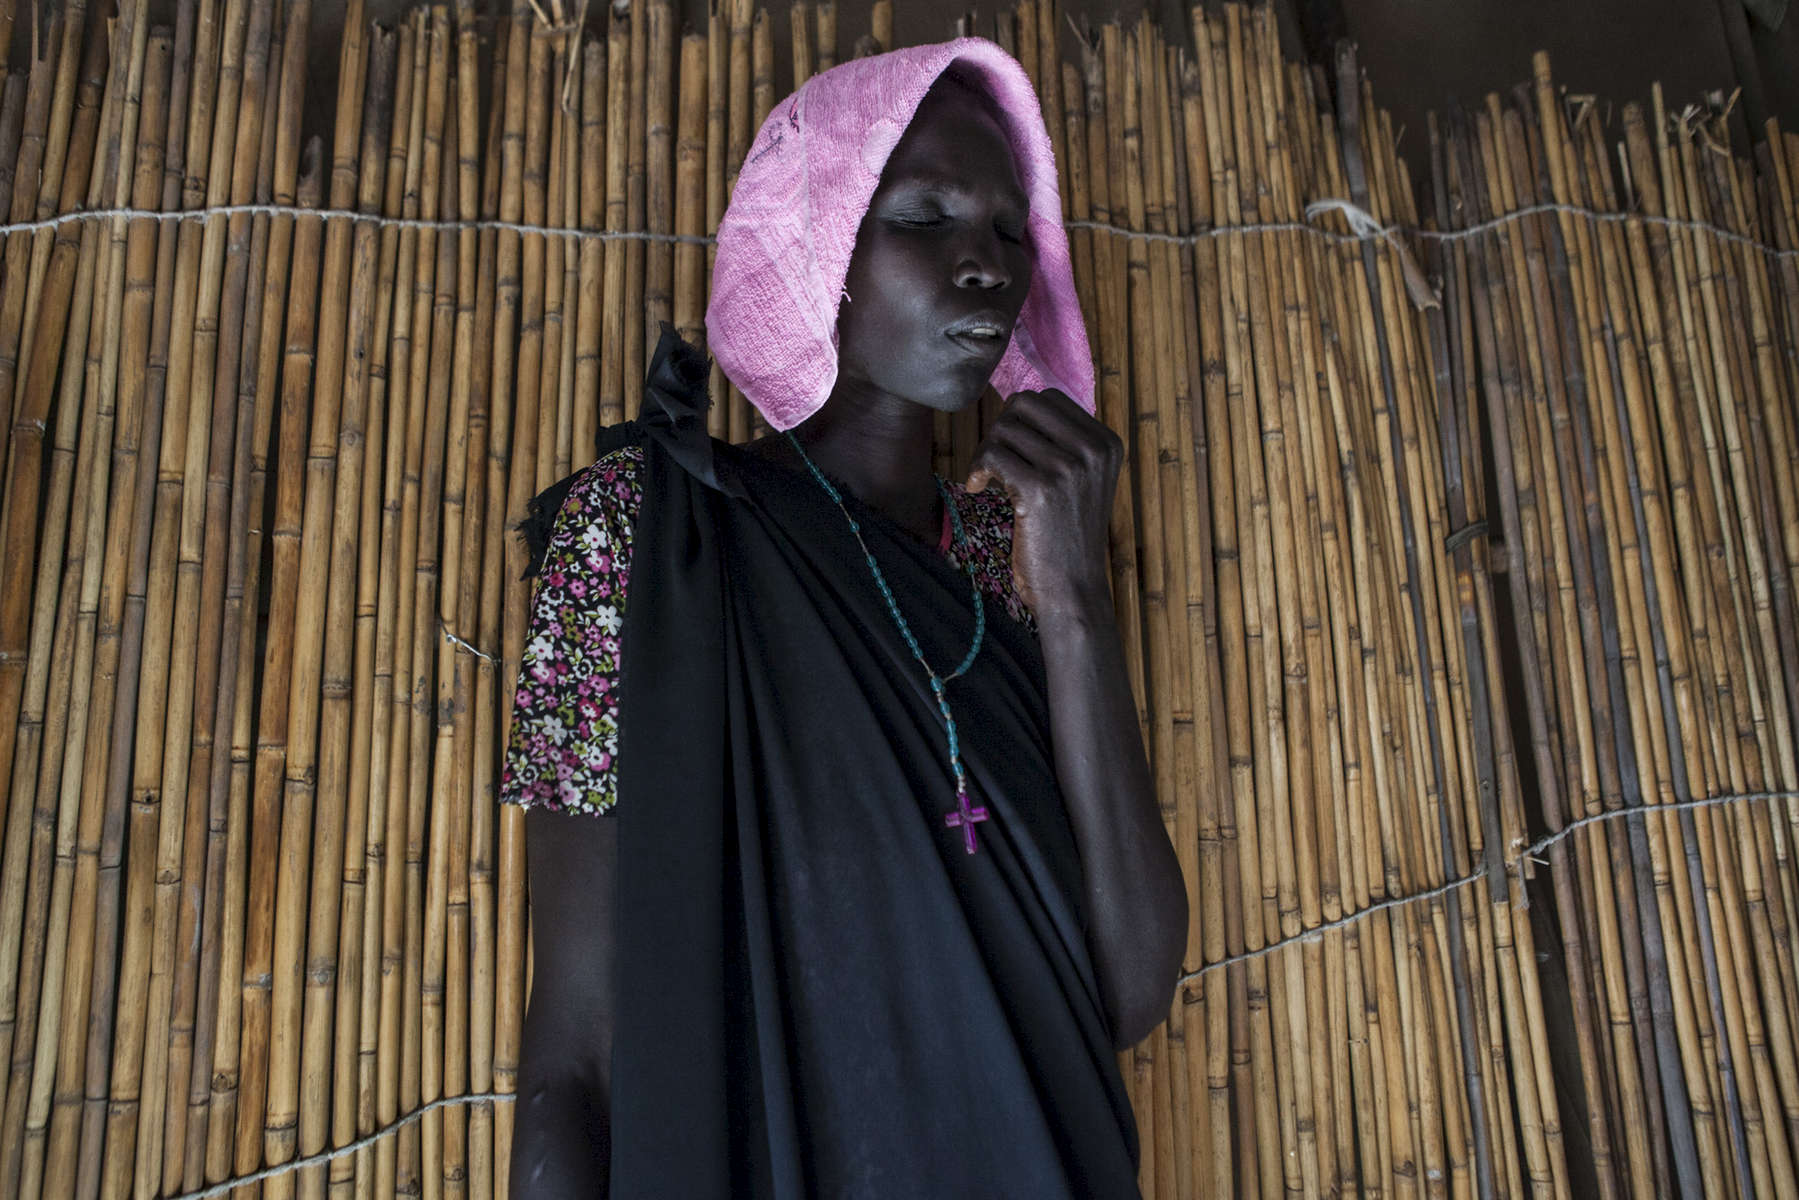 A woman prays at a Pentecostal church in the Protection of Civilians (POC) site at the United Nations Mission in South Sudan (UNMISS) compound in Malakal, South Sudan on Saturday, July 9, 2016. The Malakal POC site houses over 32,000 displaced people mainly from the Shilluk and Nuer tribes. In February of this year, members of the Dinka tribe, who resided in the camp at the time, carried out a coordinated attack within the site leading to the destruction of hundreds of shelters and many deaths. Since then, most members of the Dinka tribe have fled to Malakal town where they occupy the homes of those still displaced. 